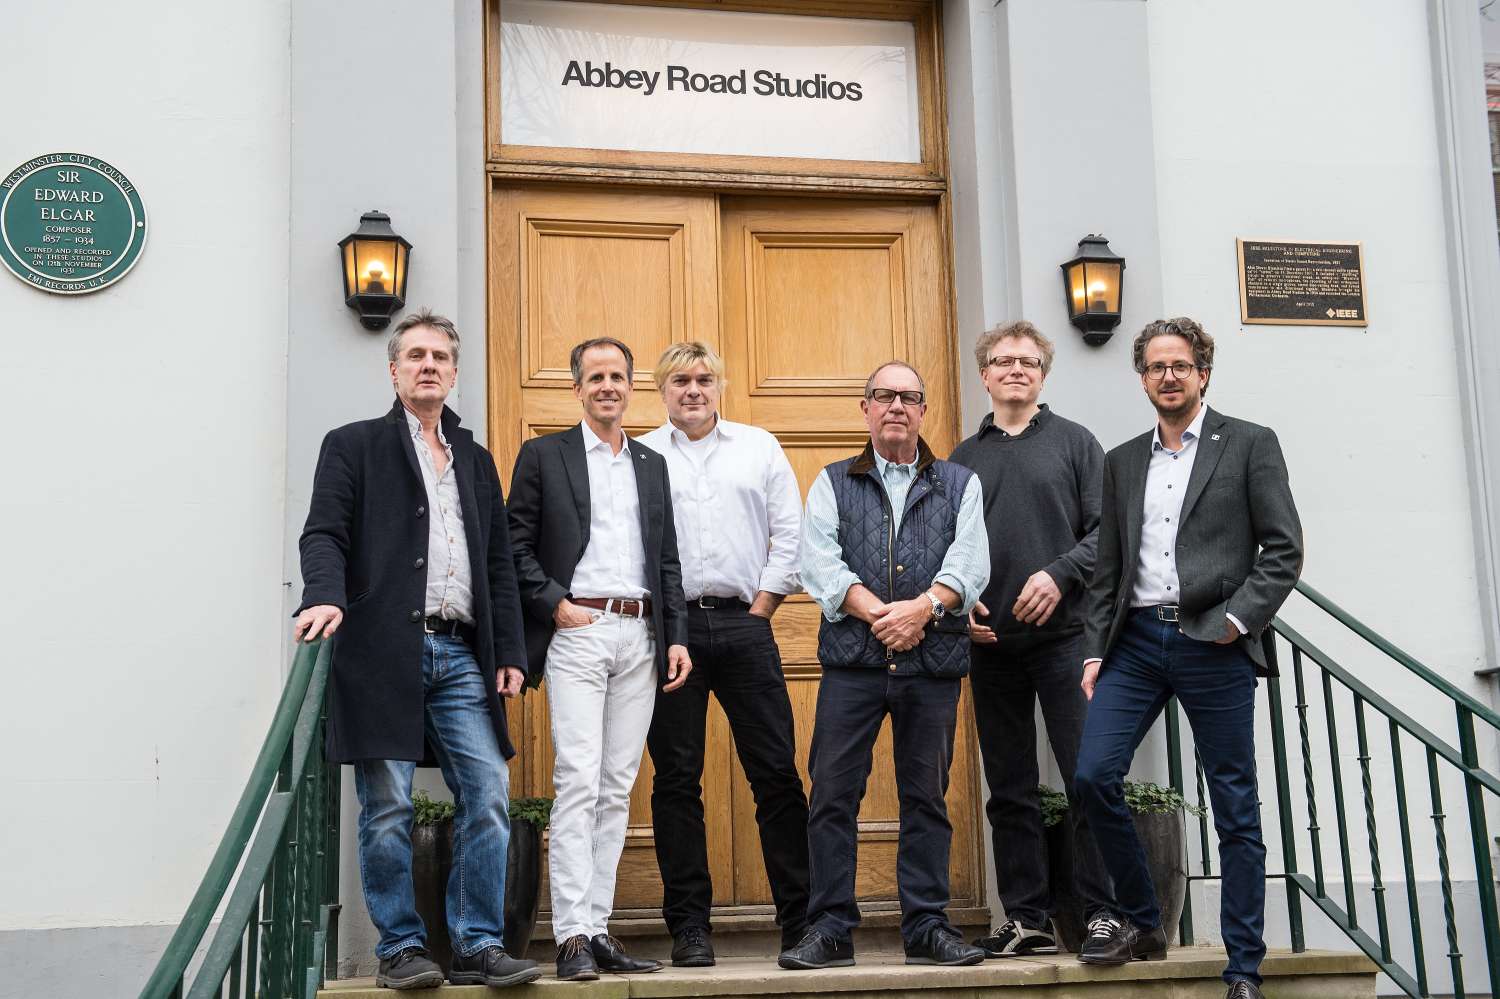 The 360° surround mix was presented earlier this month at Abbey Road Studios in London